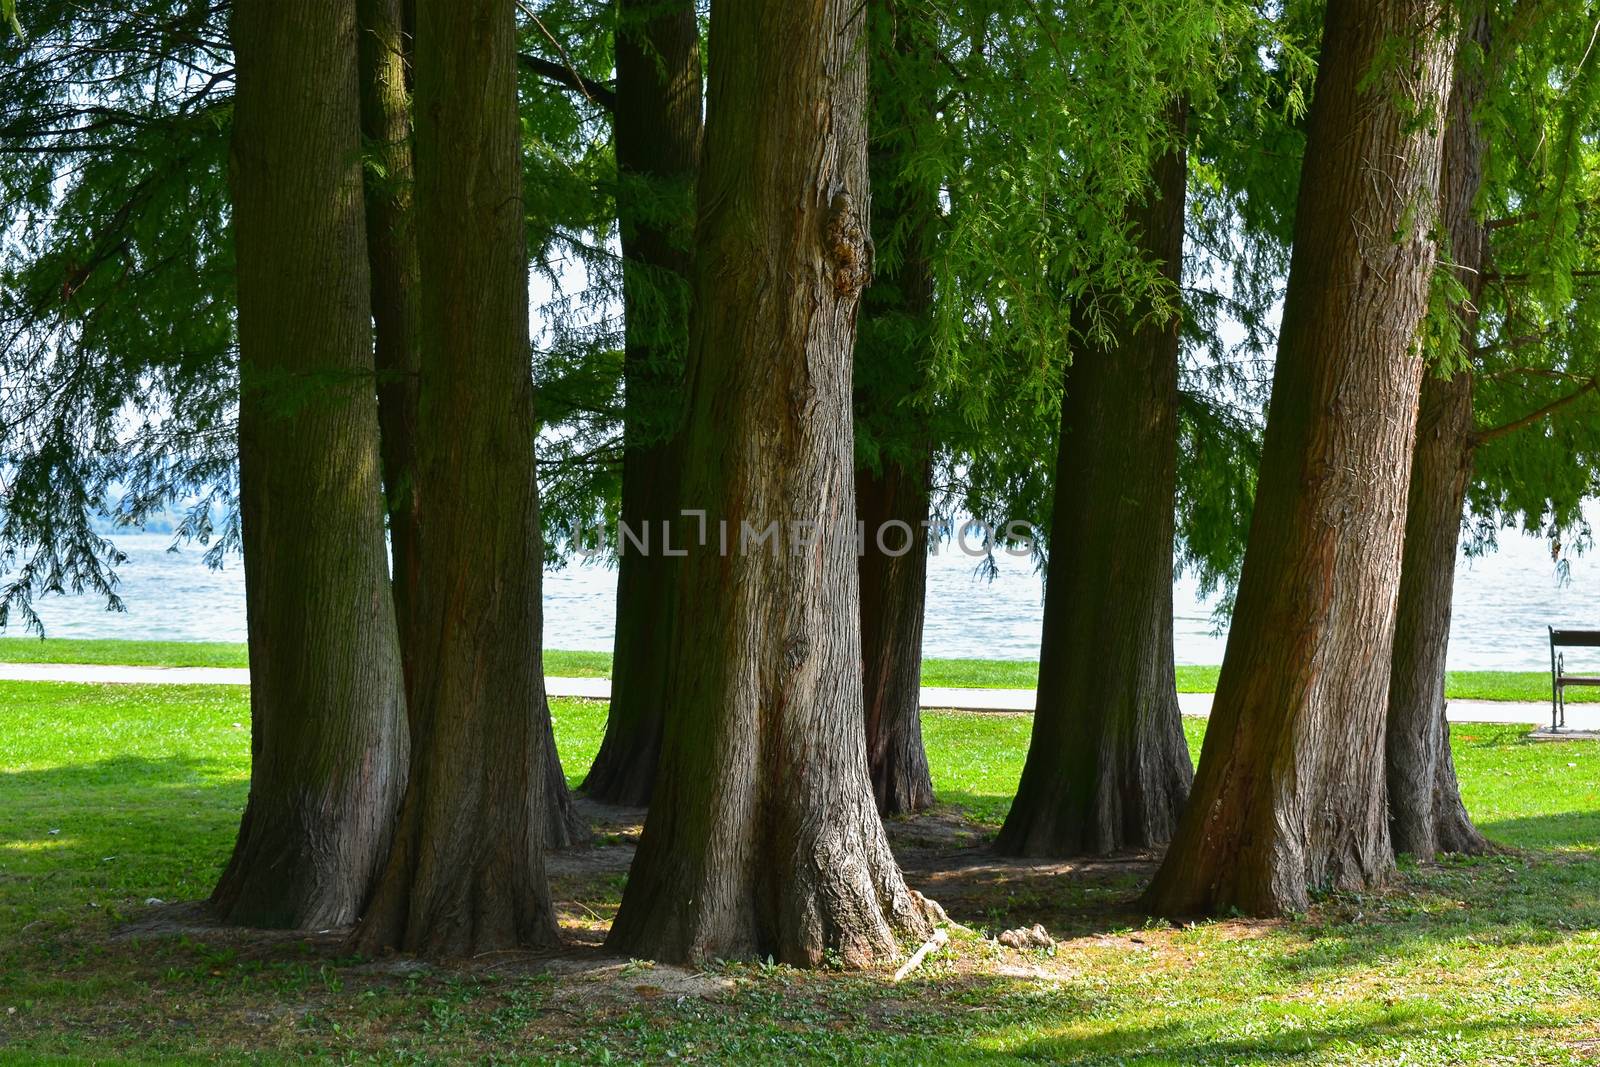 Larch trees in group, grass at summer. Lakeshore in the background, with walking path. Latin name Larix. Green nature background with shallow depth of field, soft focus.